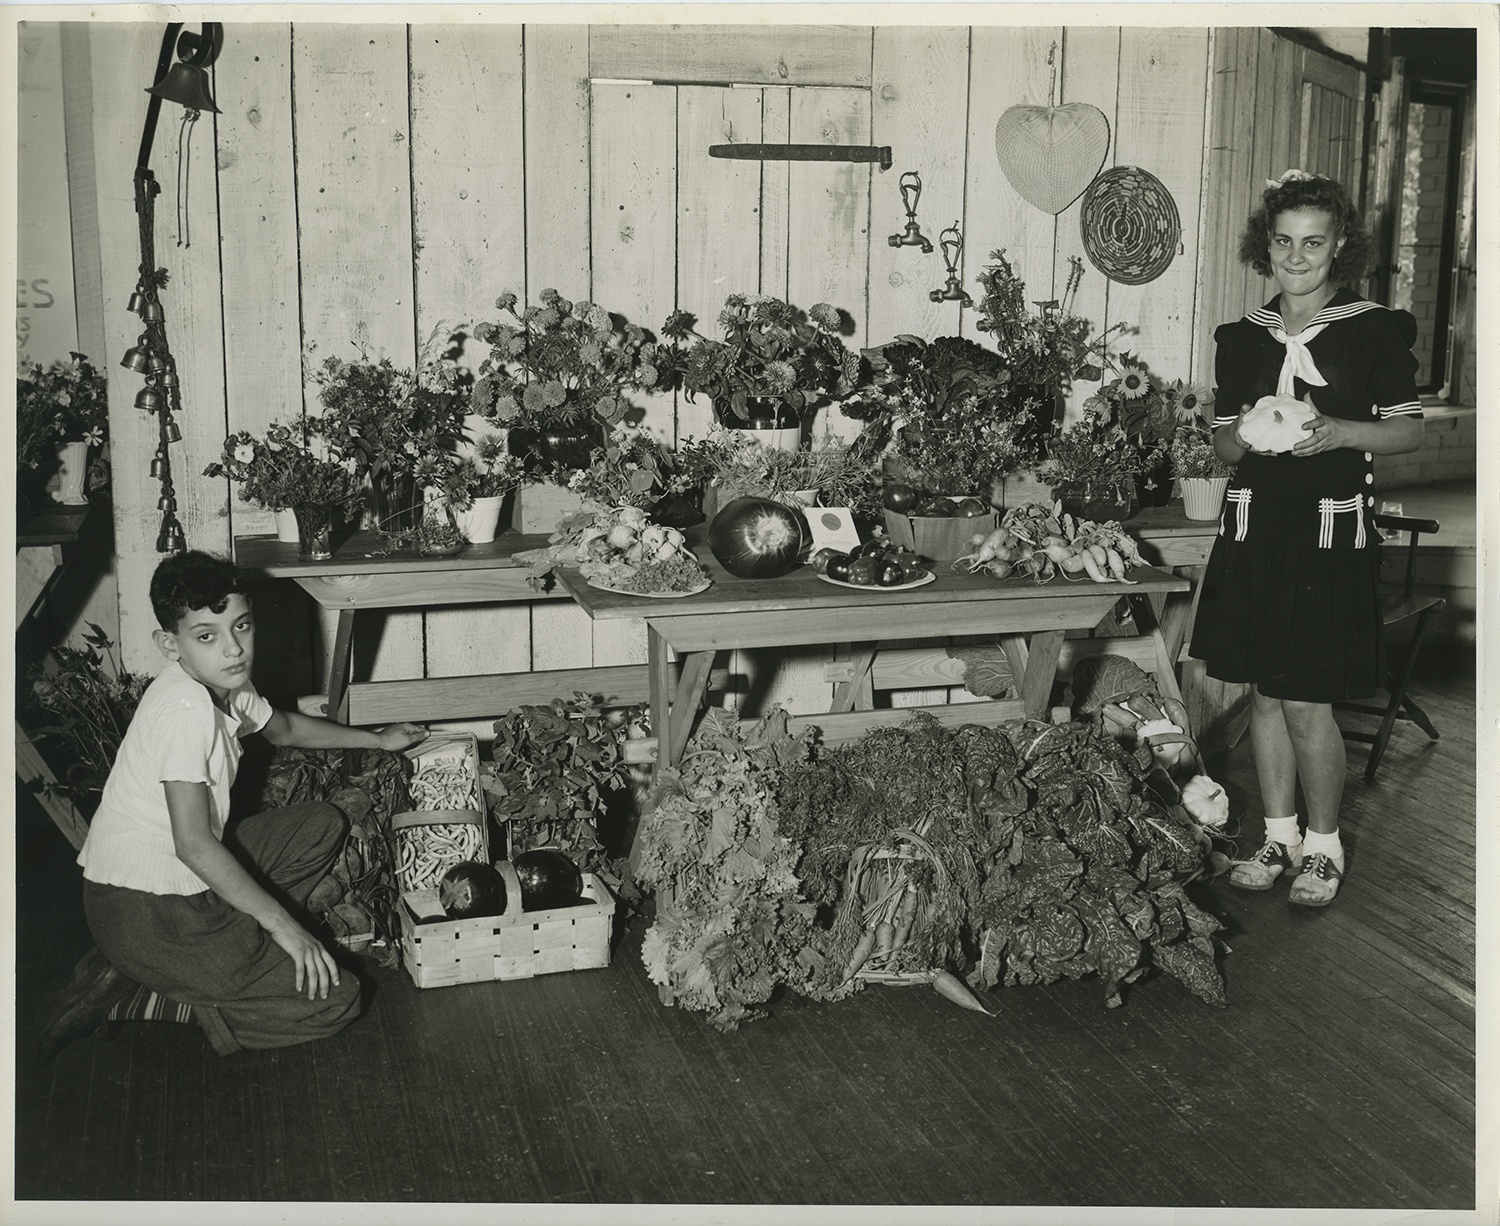 Pittsburgh Public School students pose with the output from one of their gardens, possibly a victory garden, 1940s.